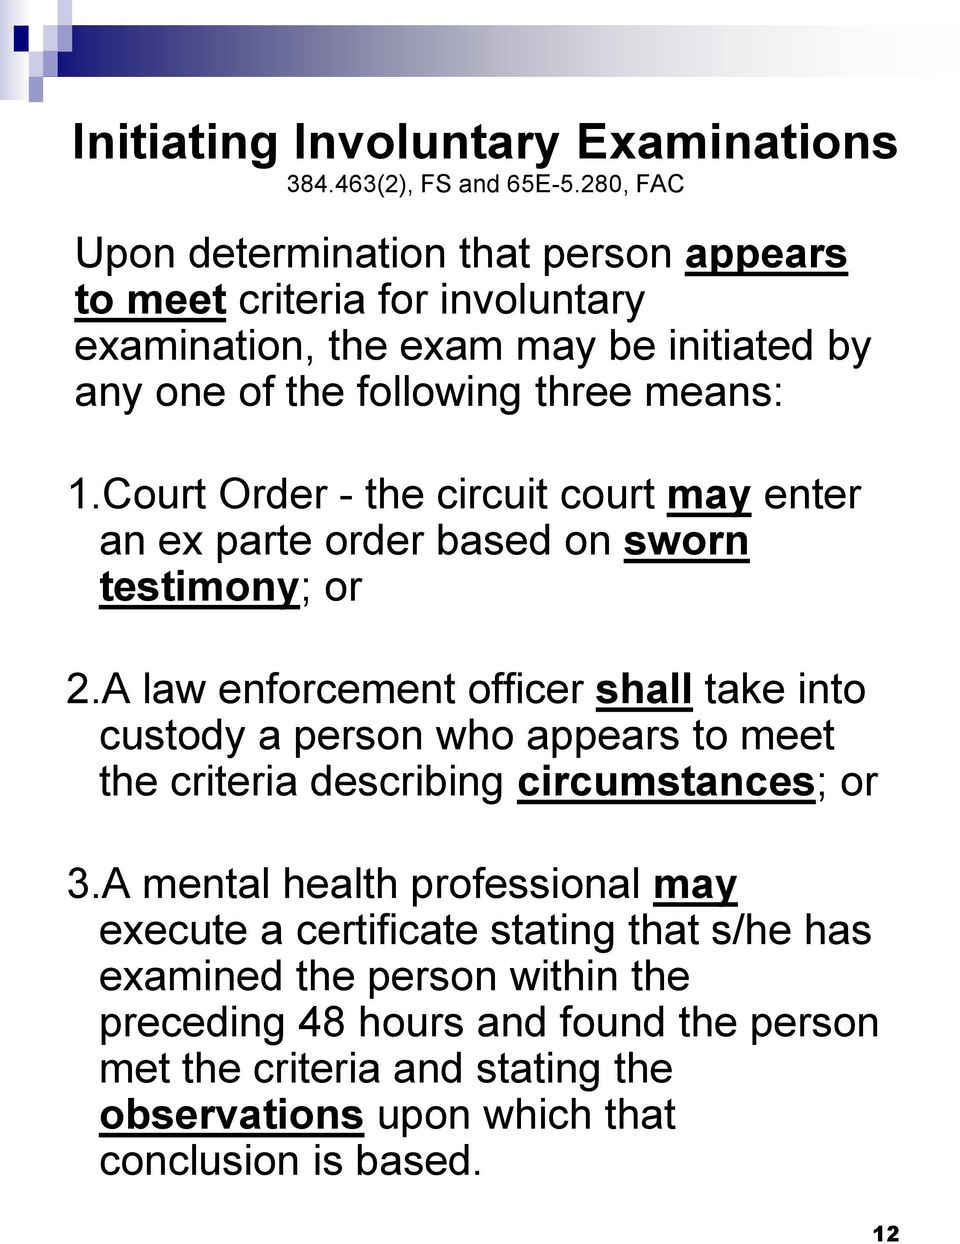 Court Order - the circuit court may enter an ex parte order based on sworn testimony; or 2.